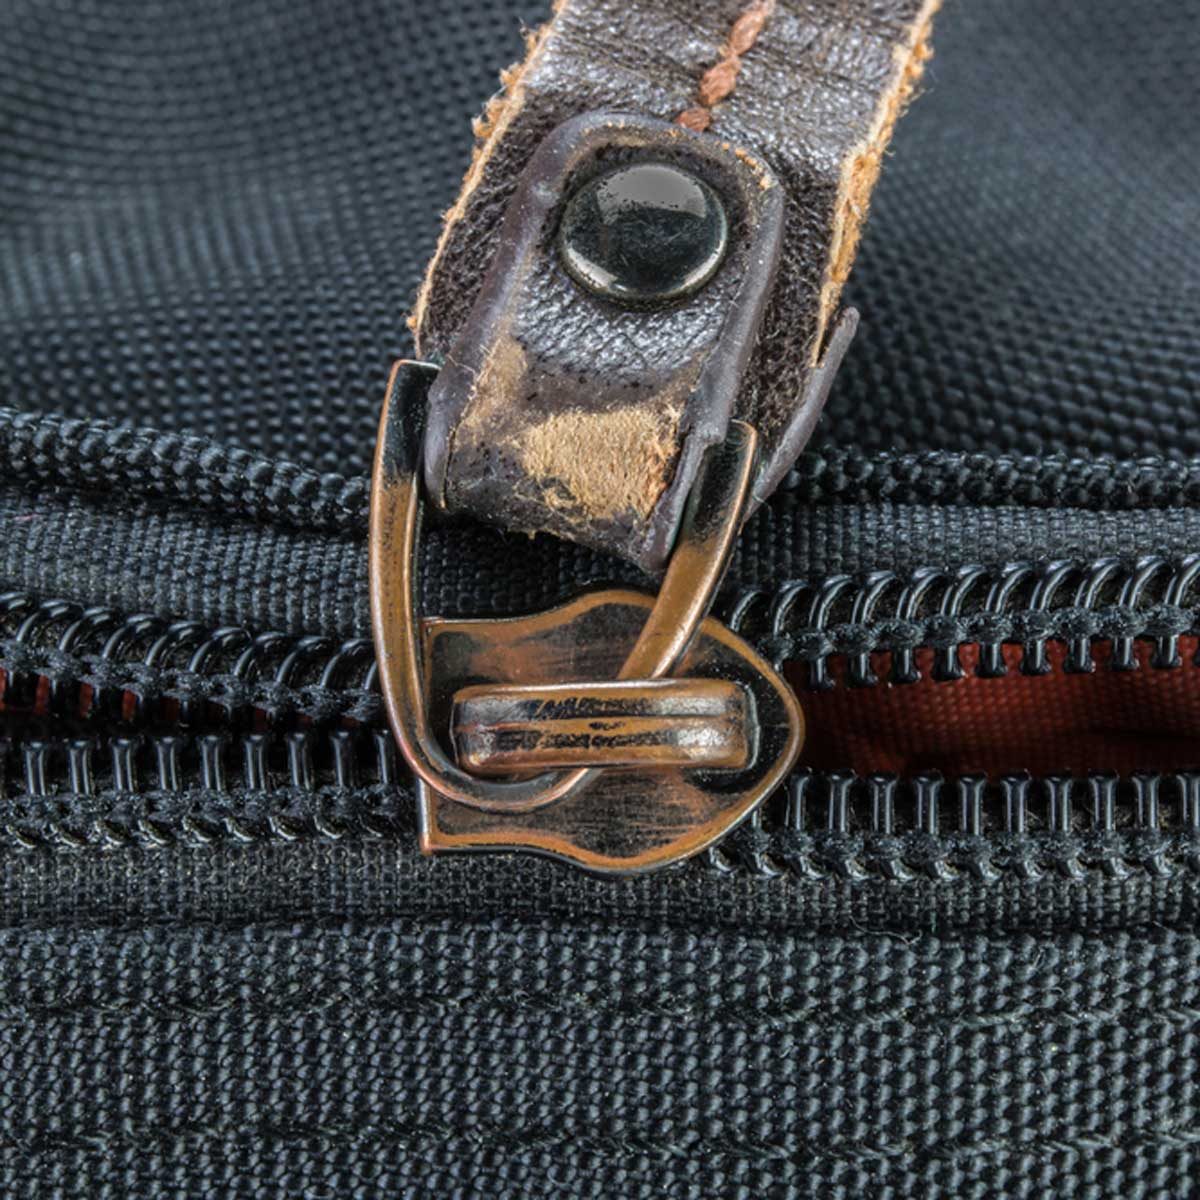 Home Ring Zipper Pull Replacement Zipper Tab Repair For Boots